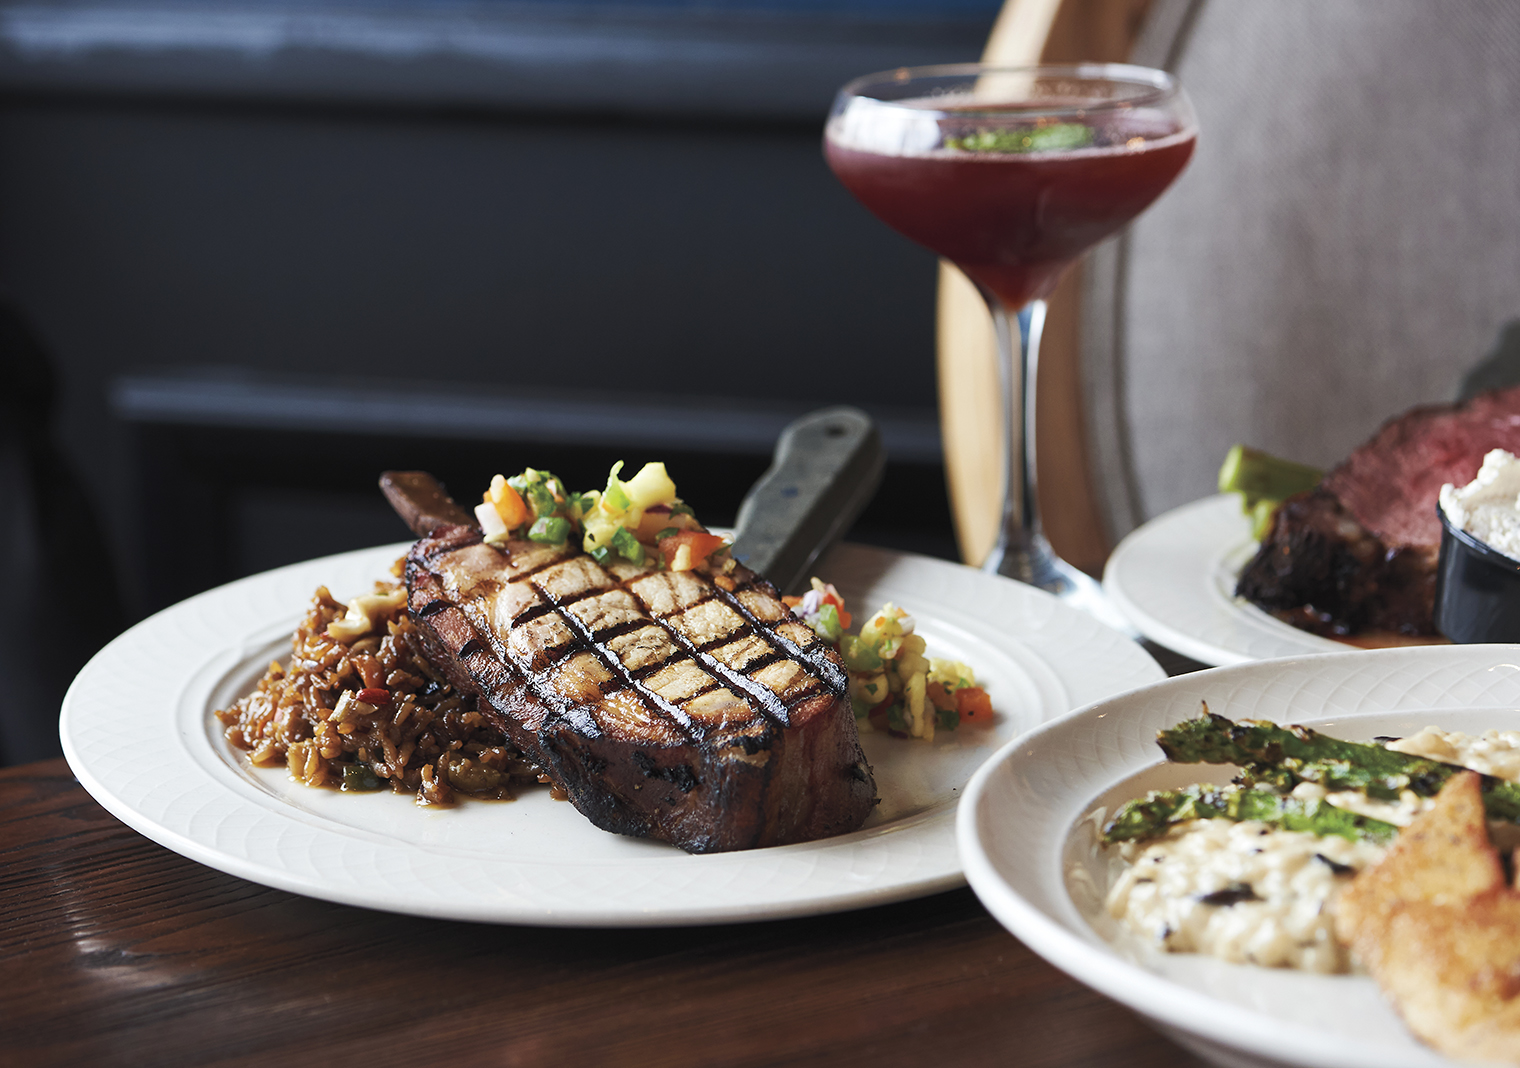 Clockwise from left: A beautiful bone-in pork chop topped with pineapple salsa, Creole Williams cocktail, Porterhouse Steak, Seared Walleye fillet with mushroom risotto and asparagus